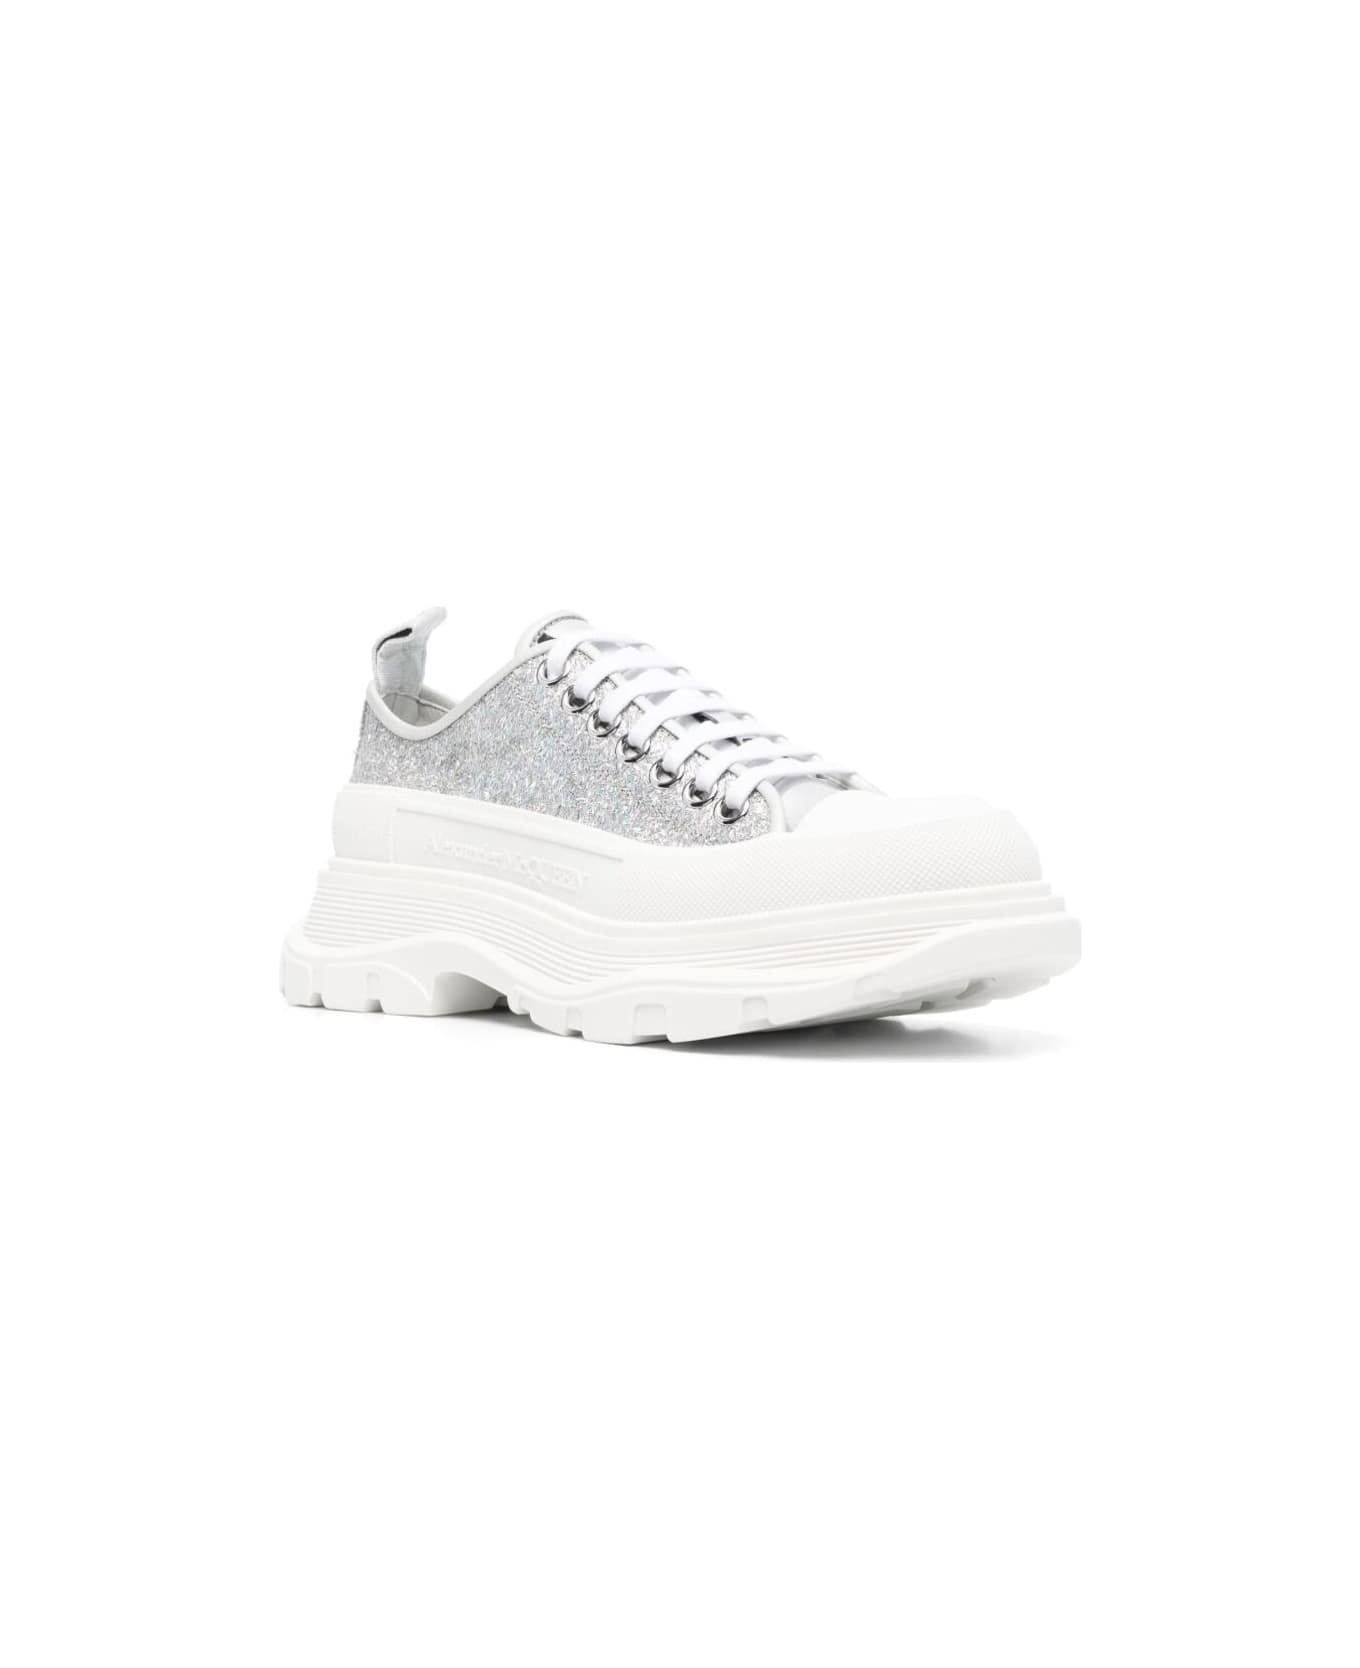 Alexander McQueen 'tread Slick' White And Silver Sneakers With Oversized Platform And All-over Glitters In Cotton Woman - Metallic